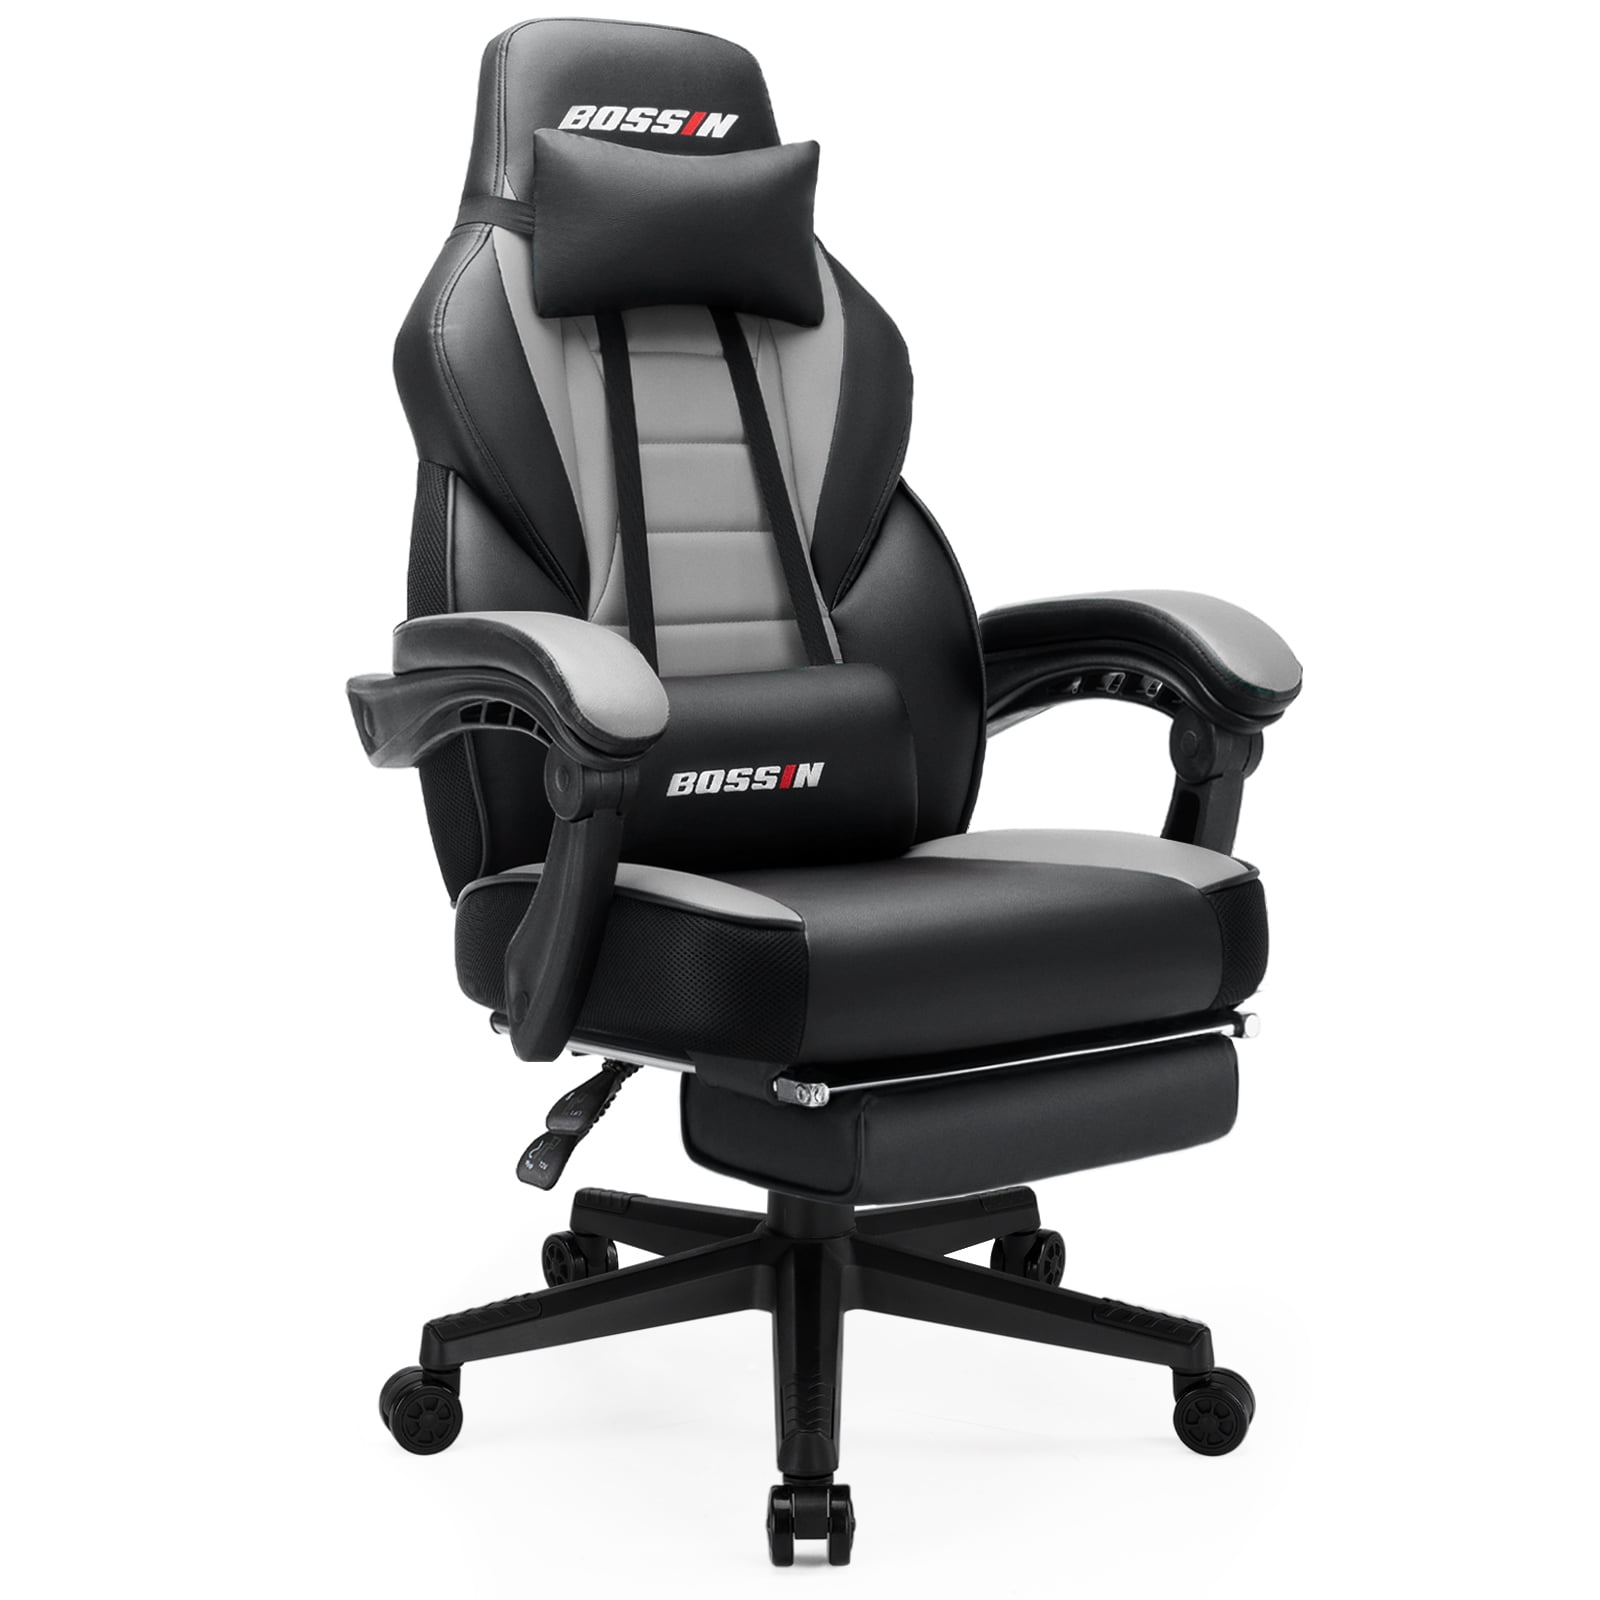 Black Leather Gaming Chair with Footrest Big and Tall Gamer Chair